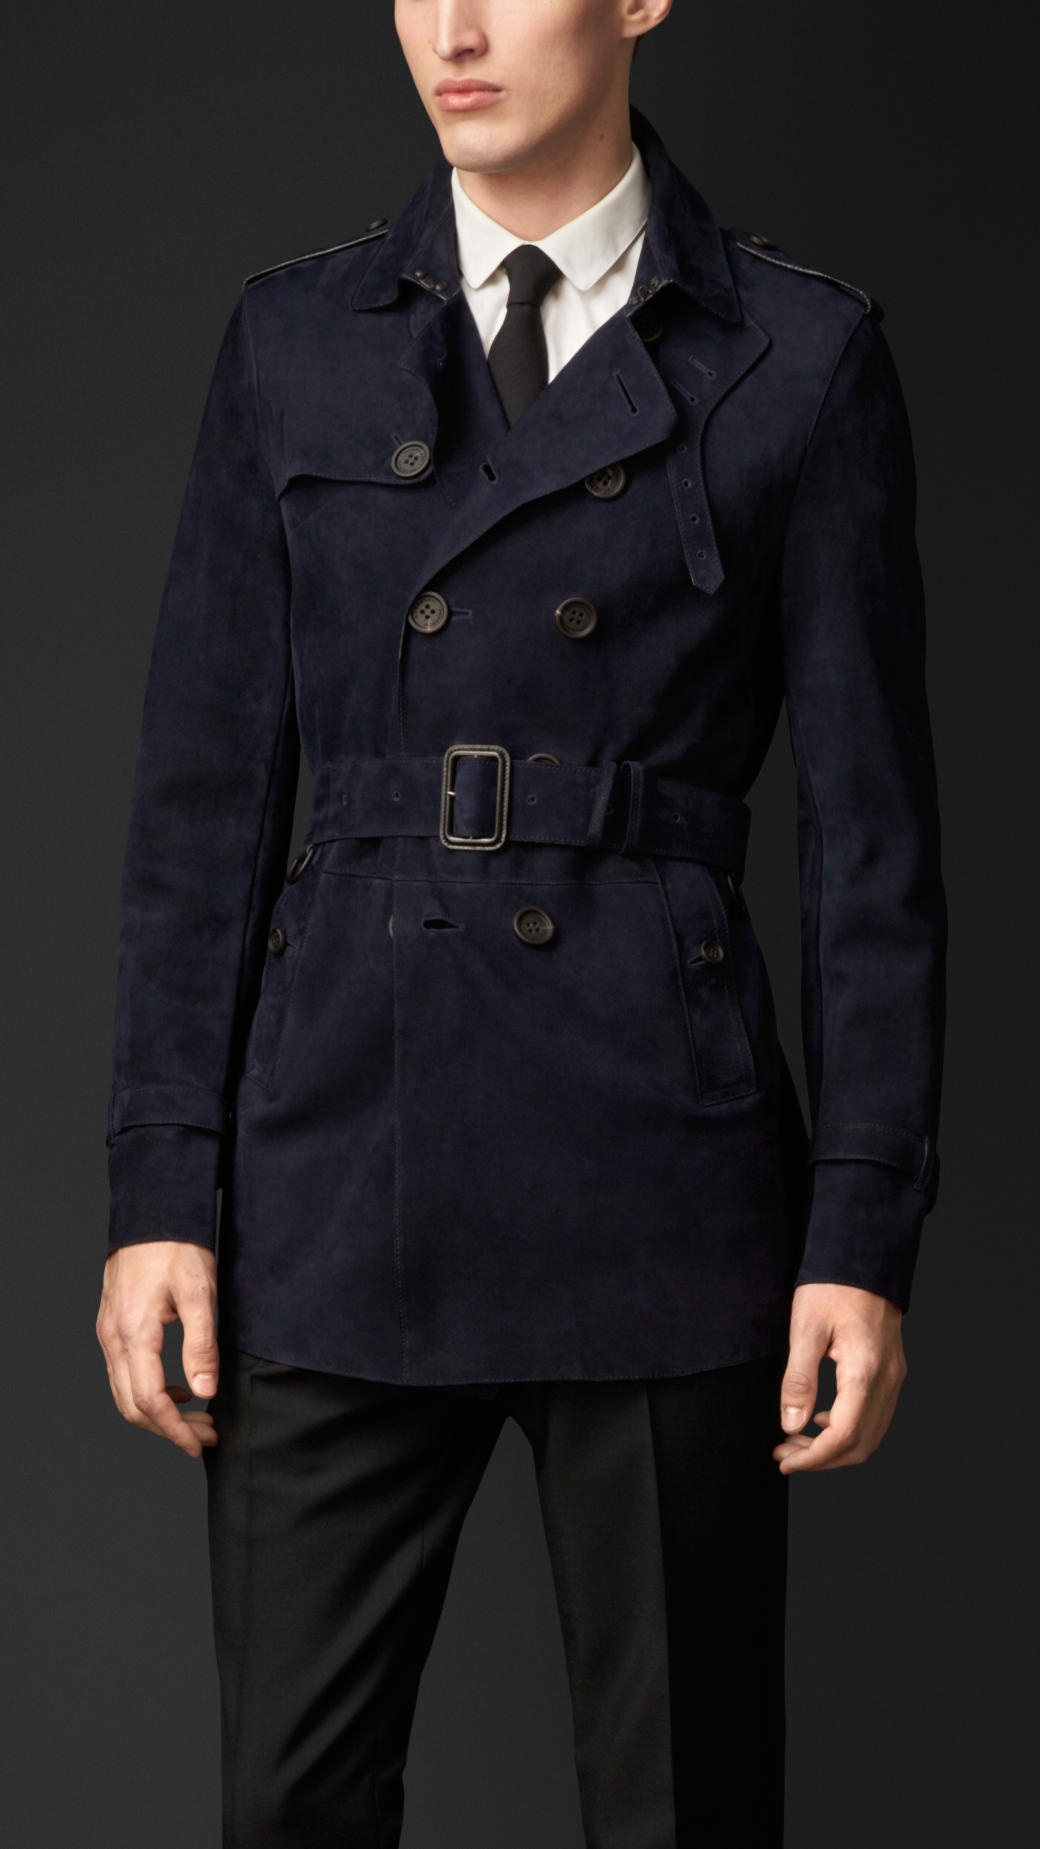 Burberry Suede Trench Coat in Blue for Men - Lyst